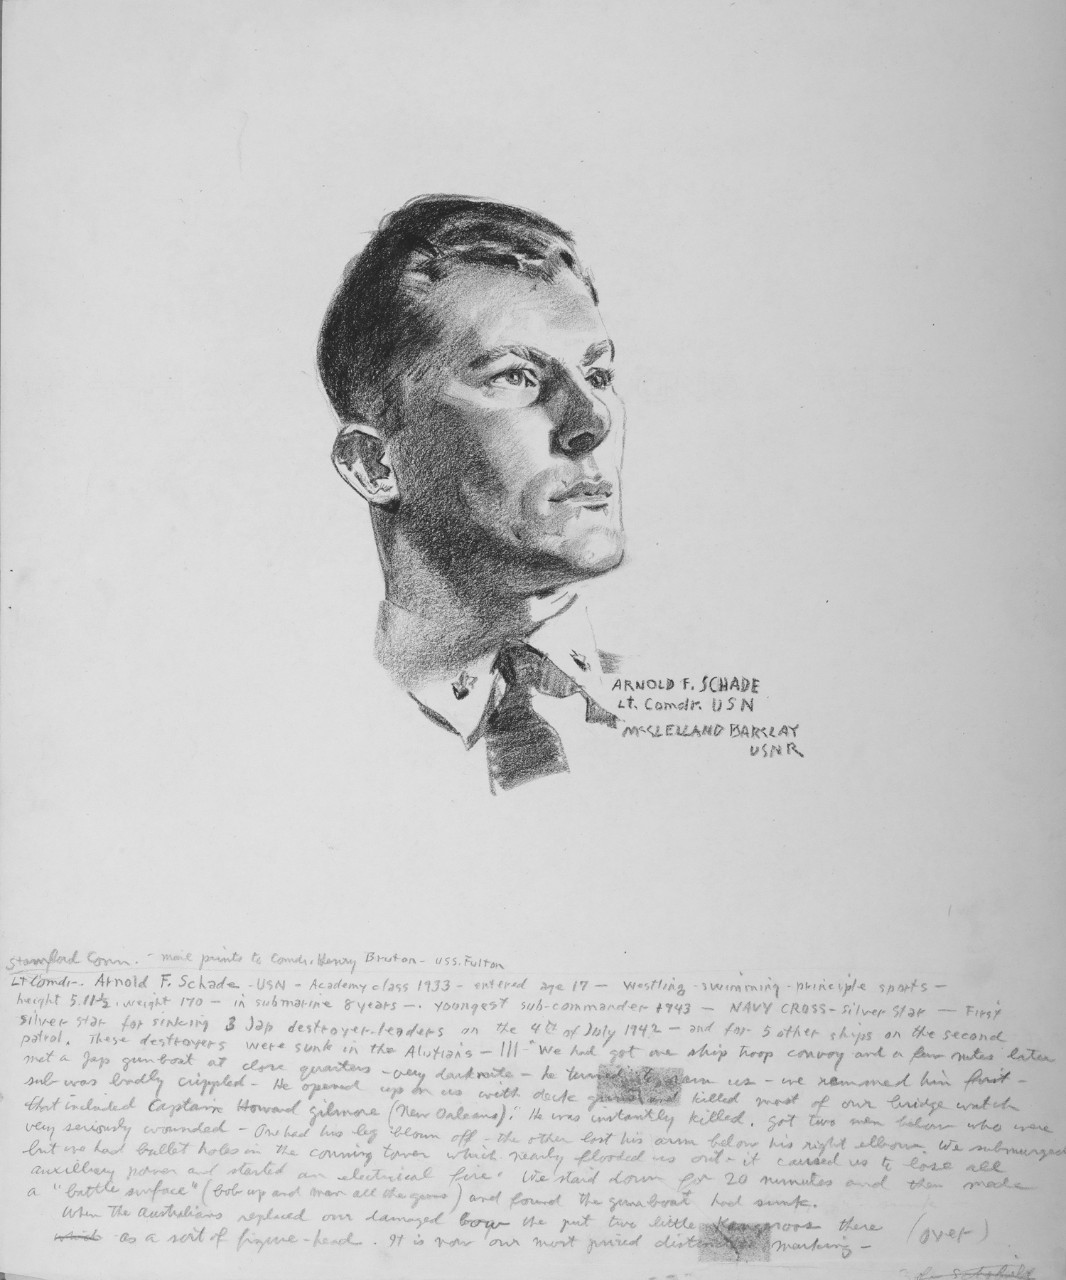 Portrait of  LCDR Arnold F. Schade